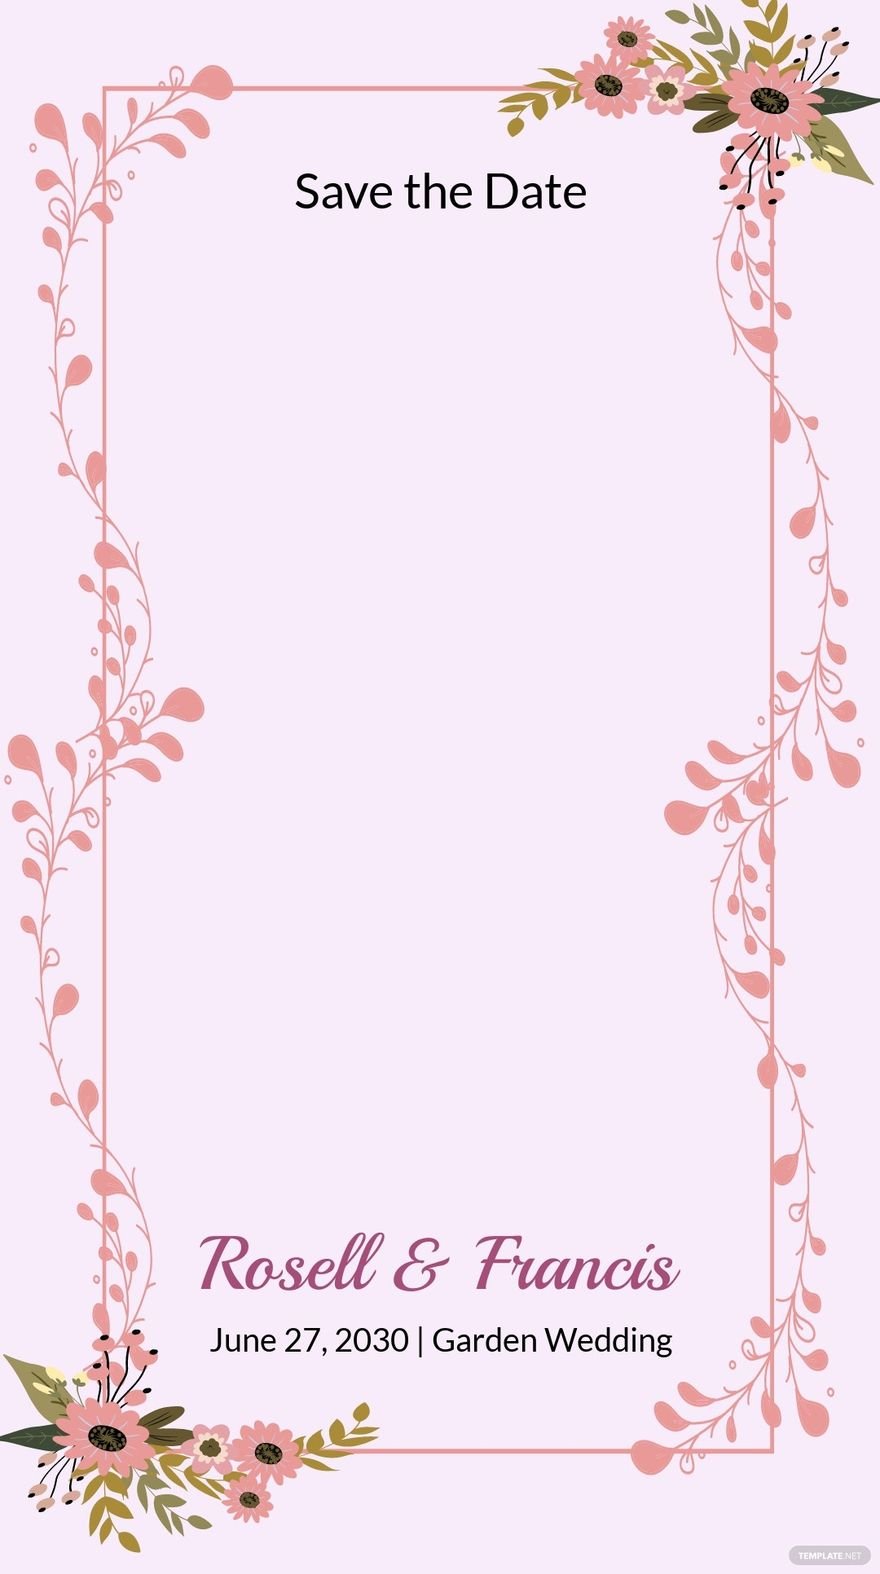 Floral  Save The Date Snapchat Geofilter Template.jpe